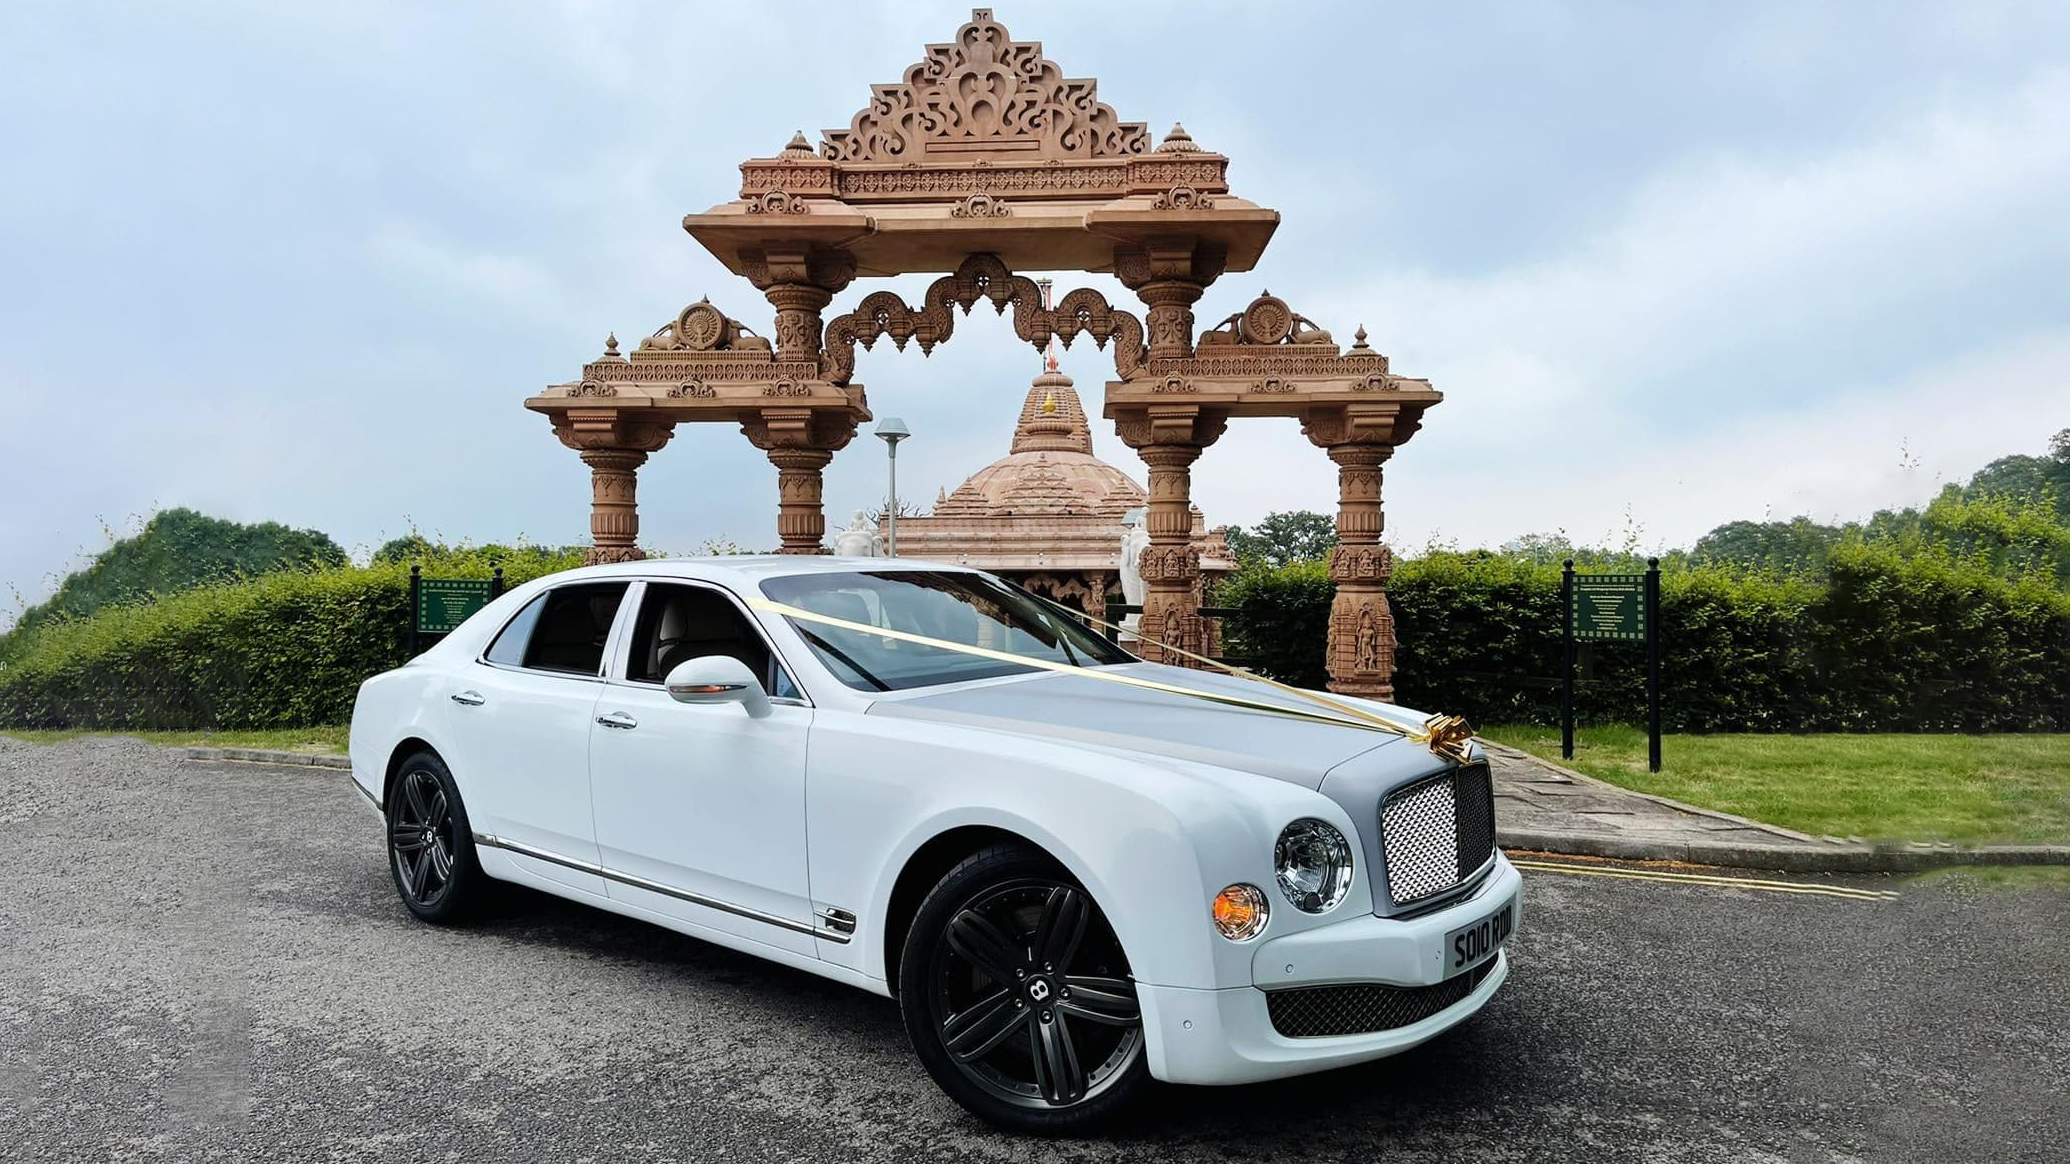 Modern Bentley Mulsanne with Black alloy wheels and Gold ribbons park in front of an Asian Temple in Cranfield.